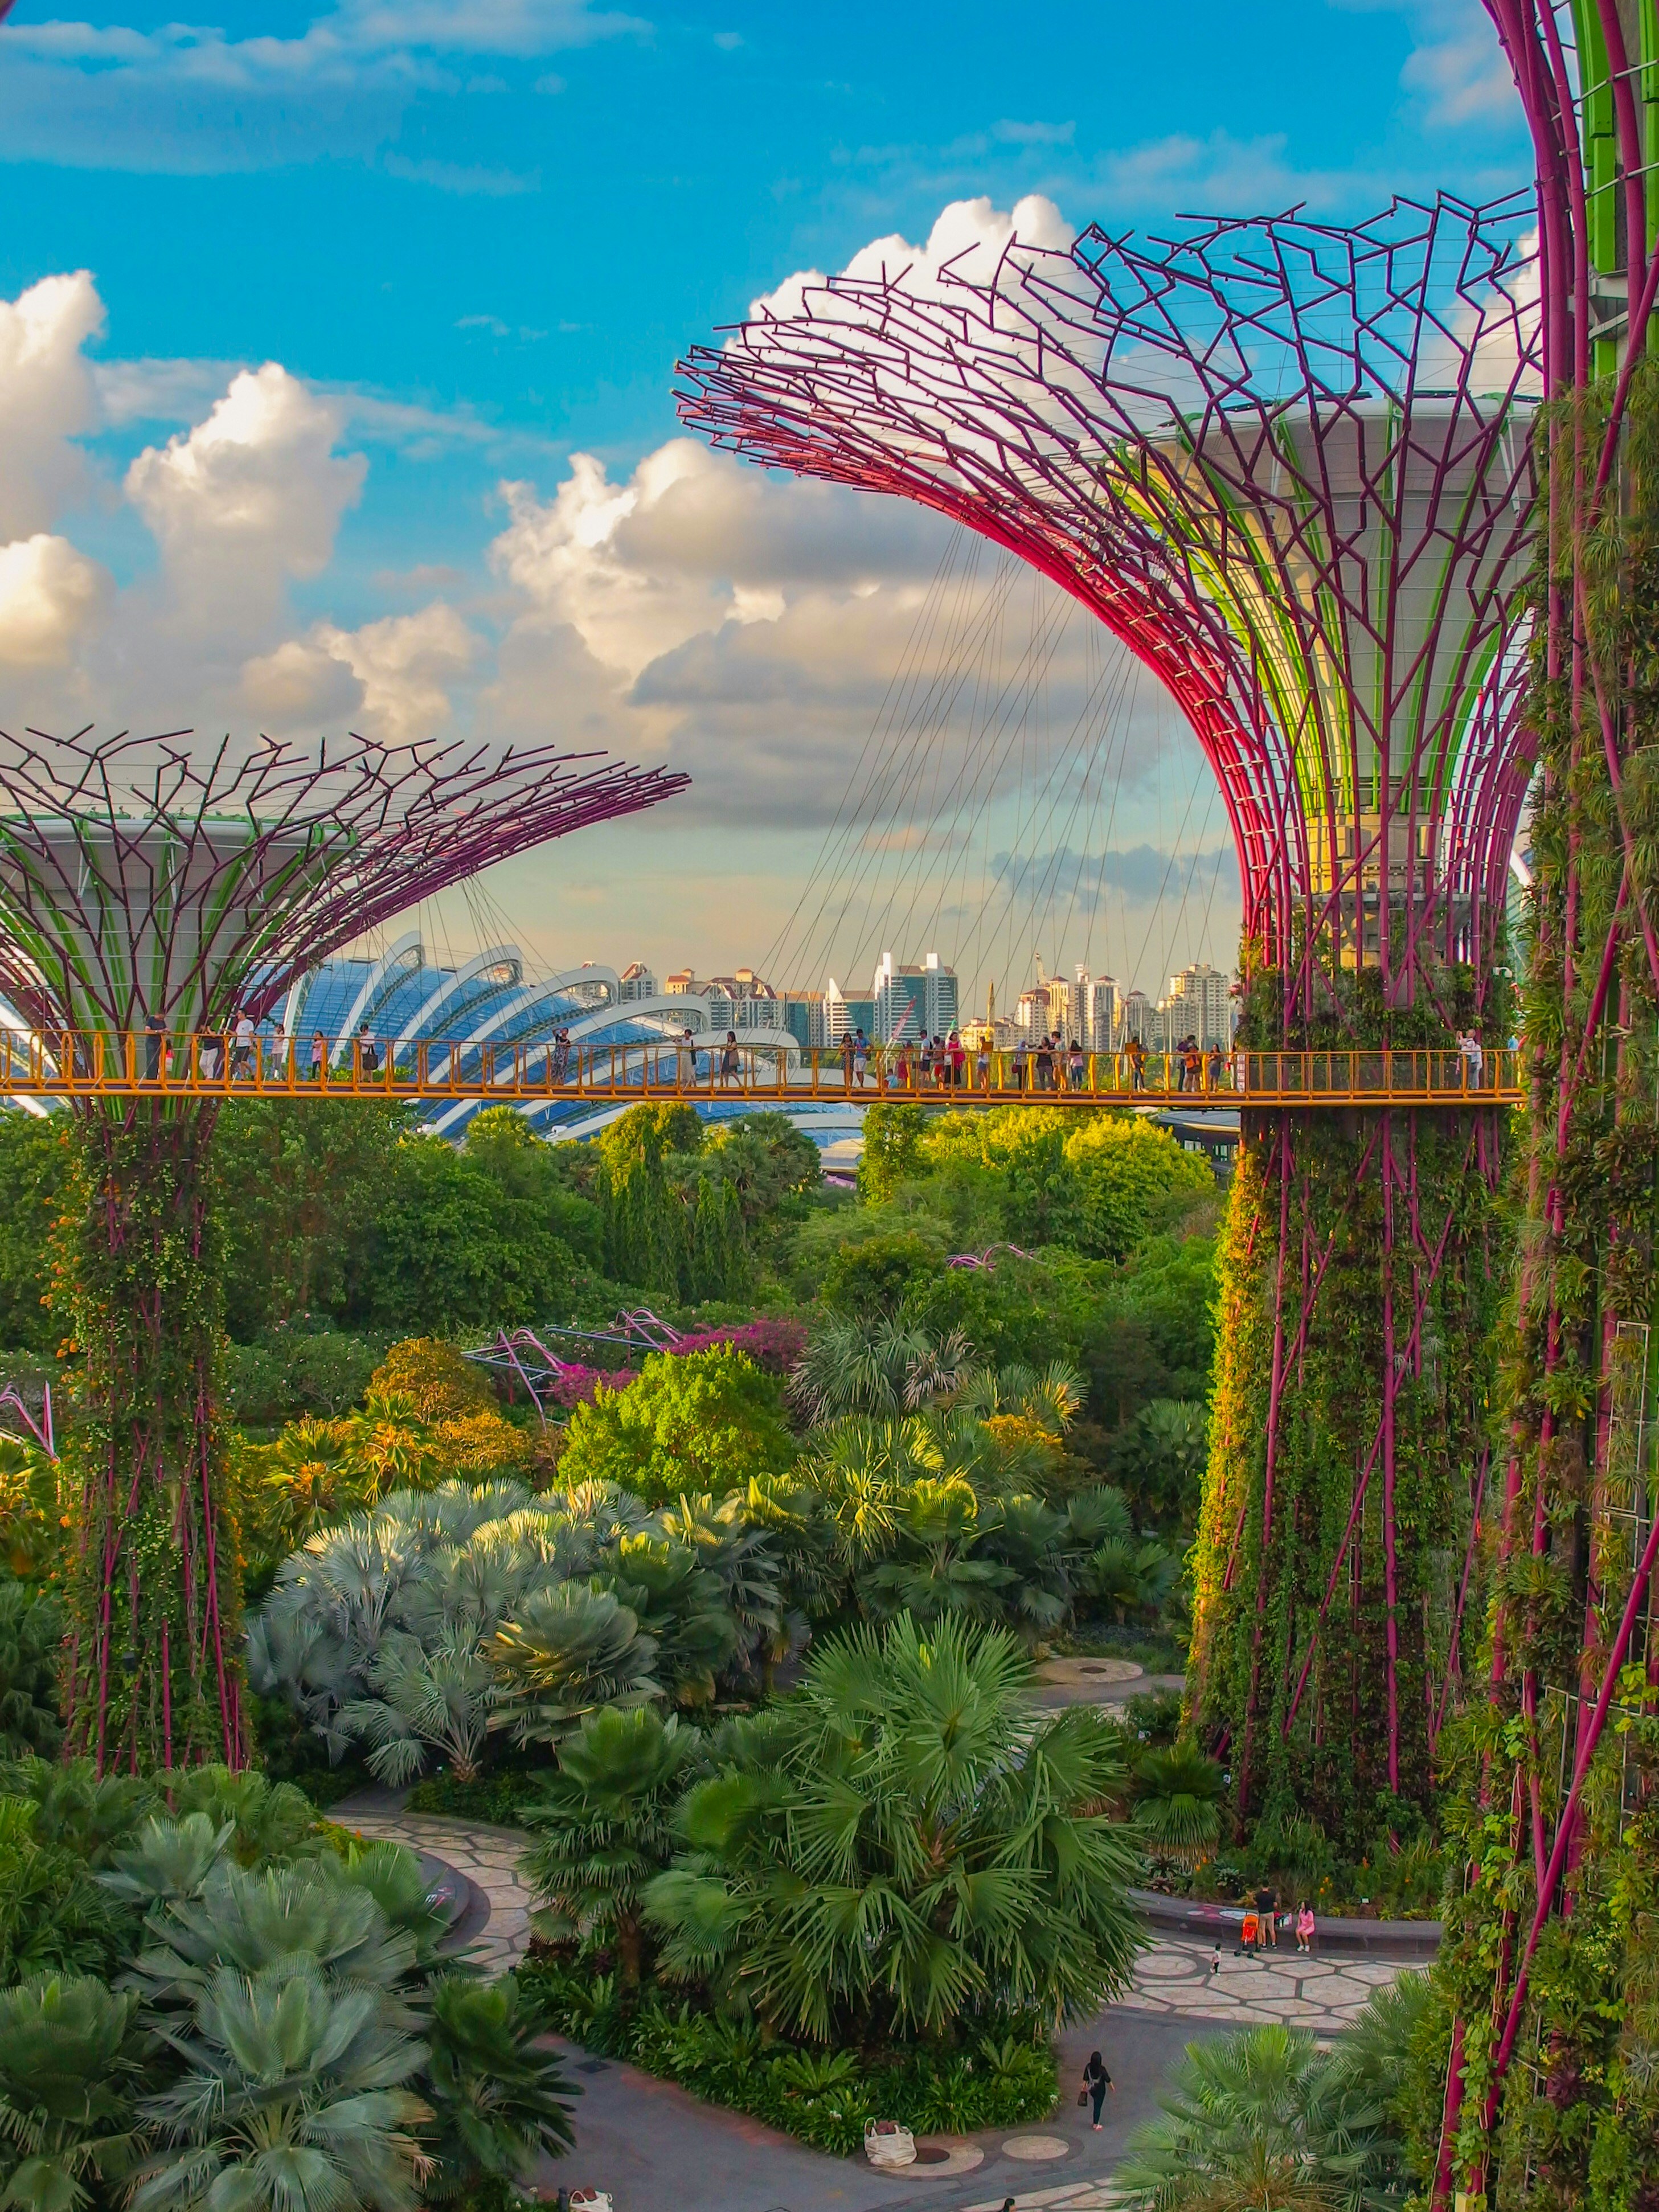 I was on a layover in Singapore and decided to visit the Super Tree Grove at Gardens by the Bay. I arrived in the late afternoon and the lighting was brilliant. This is taken from the walkway connecting the trees. Just an amazing site to visit, especially at sunset.